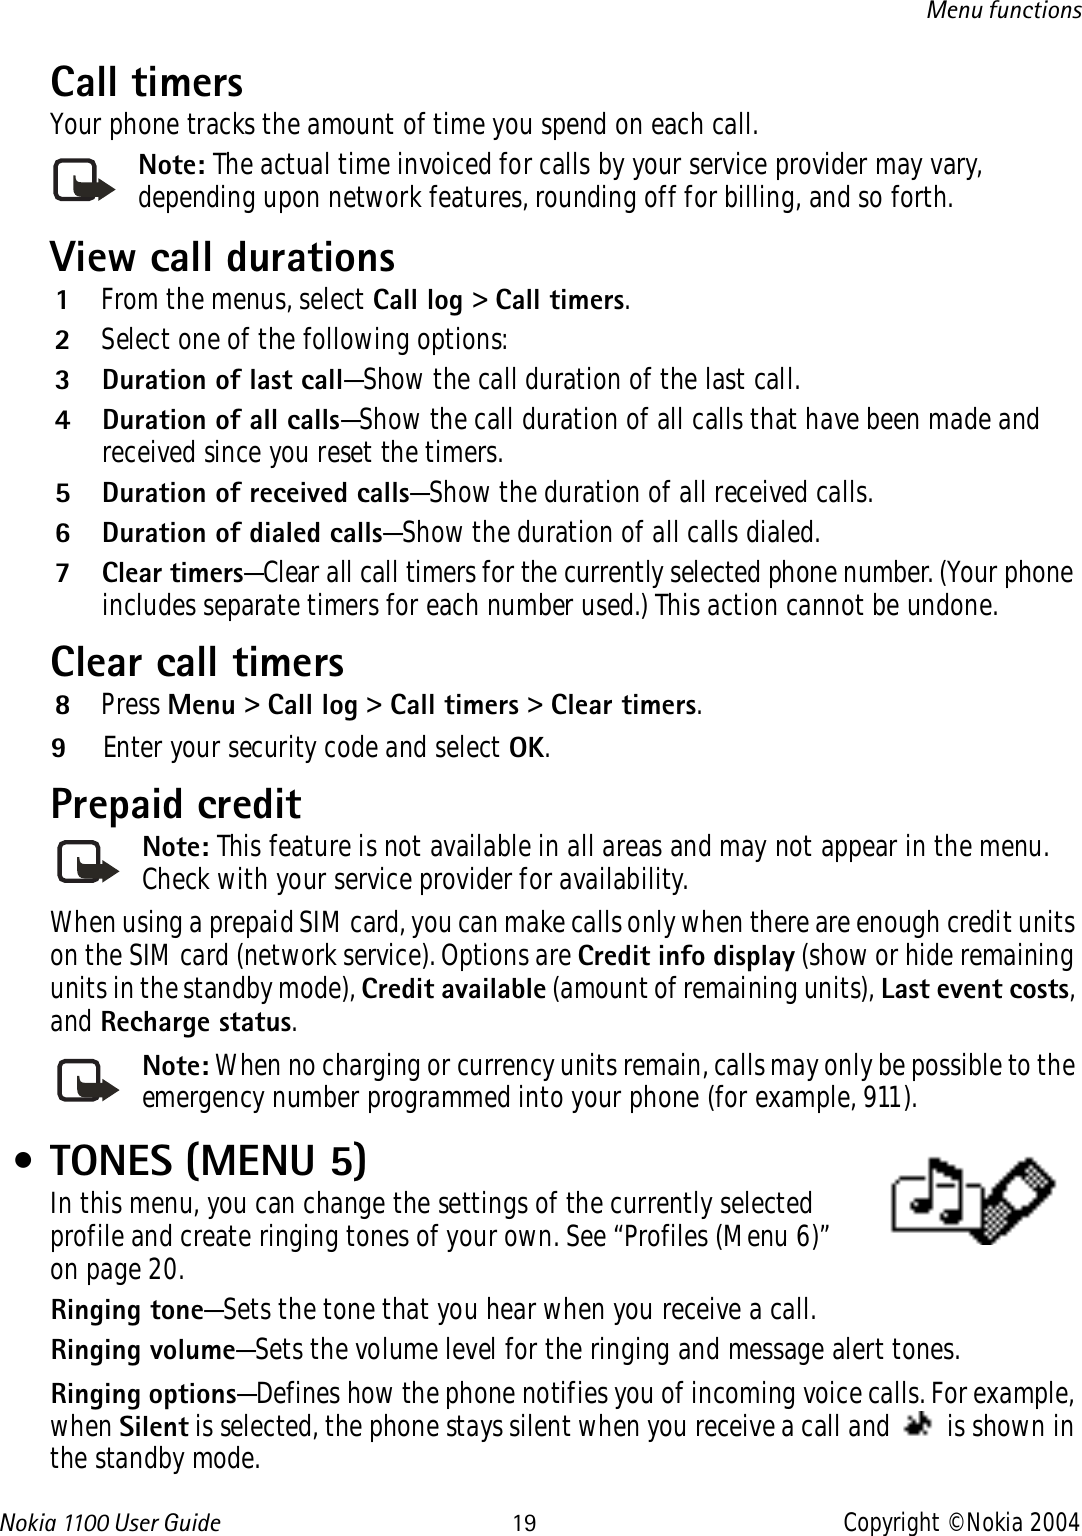 Nokia 110 0  User Guide 19 Copyright © Nokia 2004Menu functionsCall timersYour phone tracks the amount of time you spend on each call. Note: The actual time invoiced for calls by your service provider may vary, depending upon network features, rounding off for billing, and so forth.View call durations1From the menus, select Call log &gt; Call timers.2Select one of the following options:3 Duration of last call—Show the call duration of the last call.4 Duration of all calls—Show the call duration of all calls that have been made and received since you reset the timers.5 Duration of received calls—Show the duration of all received calls.6 Duration of dialed calls—Show the duration of all calls dialed.7Clear timers—Clear all call timers for the currently selected phone number. (Your phone includes separate timers for each number used.) This action cannot be undone.Clear call timers8Press Menu &gt; Call log &gt; Call timers &gt; Clear timers.9Enter your security code and select OK.Prepaid credit Note: This feature is not available in all areas and may not appear in the menu. Check with your service provider for availability. When using a prepaid SIM card, you can make calls only when there are enough credit units on the SIM card (network service). Options are Credit info display (show or hide remaining units in the standby mode), Credit available (amount of remaining units), Last event costs, and Recharge status.Note: When no charging or currency units remain, calls may only be possible to the emergency number programmed into your phone (for example, 911). • TONES (MENU 5)In this menu, you can change the settings of the currently selected profile and create ringing tones of your own. See “Profiles (Menu 6)” on page 20.Ringing tone—Sets the tone that you hear when you receive a call.Ringing volume—Sets the volume level for the ringing and message alert tones.Ringing options—Defines how the phone notifies you of incoming voice calls. For example, when Silent is selected, the phone stays silent when you receive a call and   is shown in the standby mode.